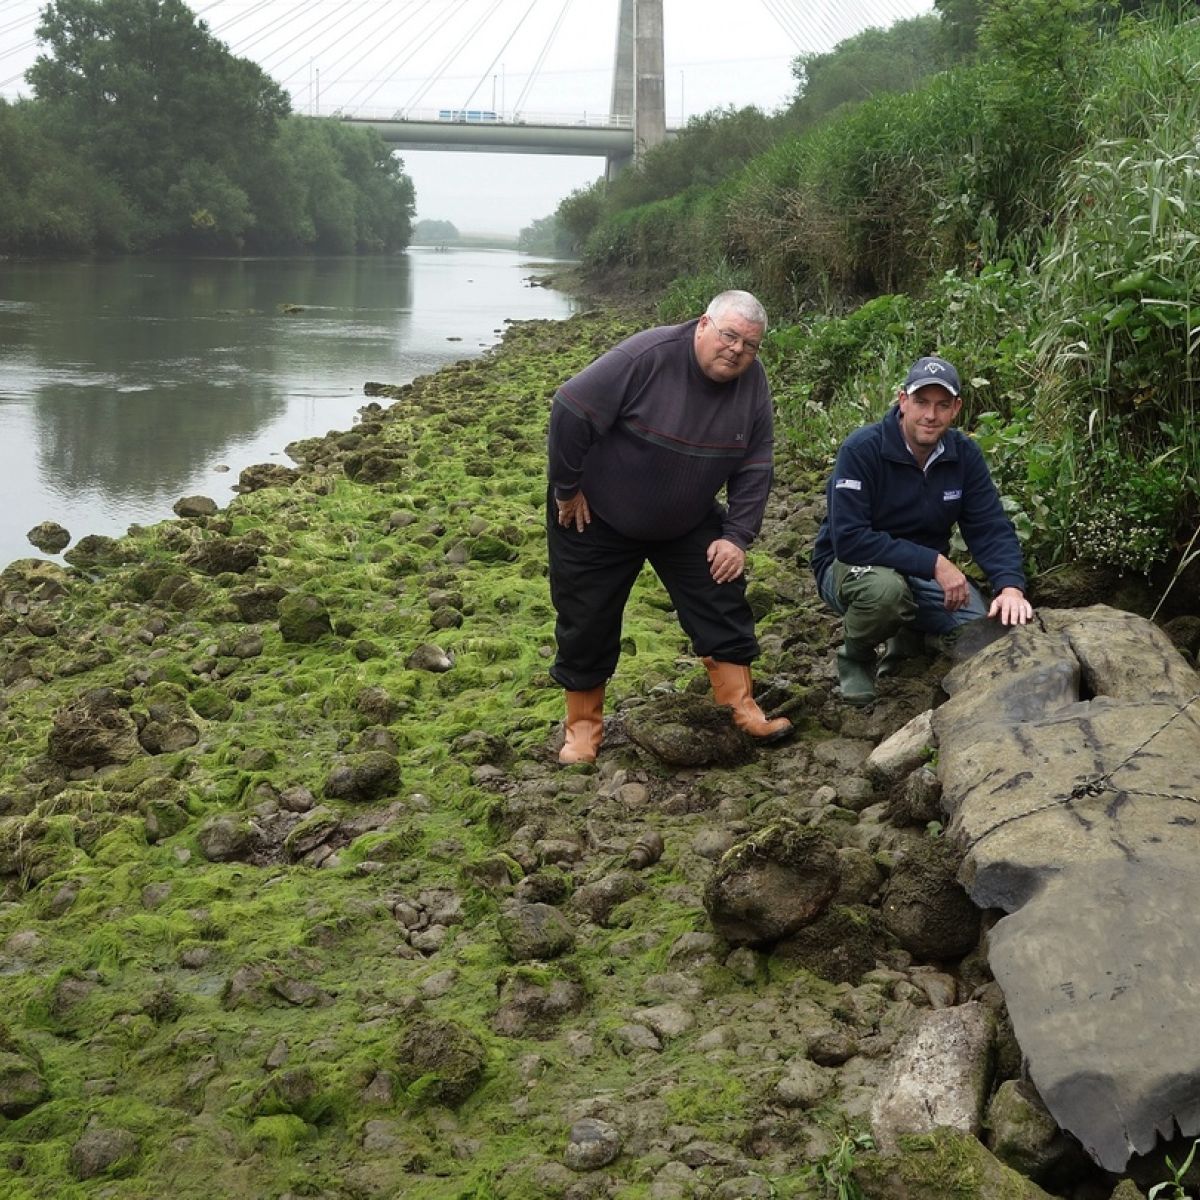 Boat Made 5 000 Years Ago Found By Men On River Boyne Fishing Trip